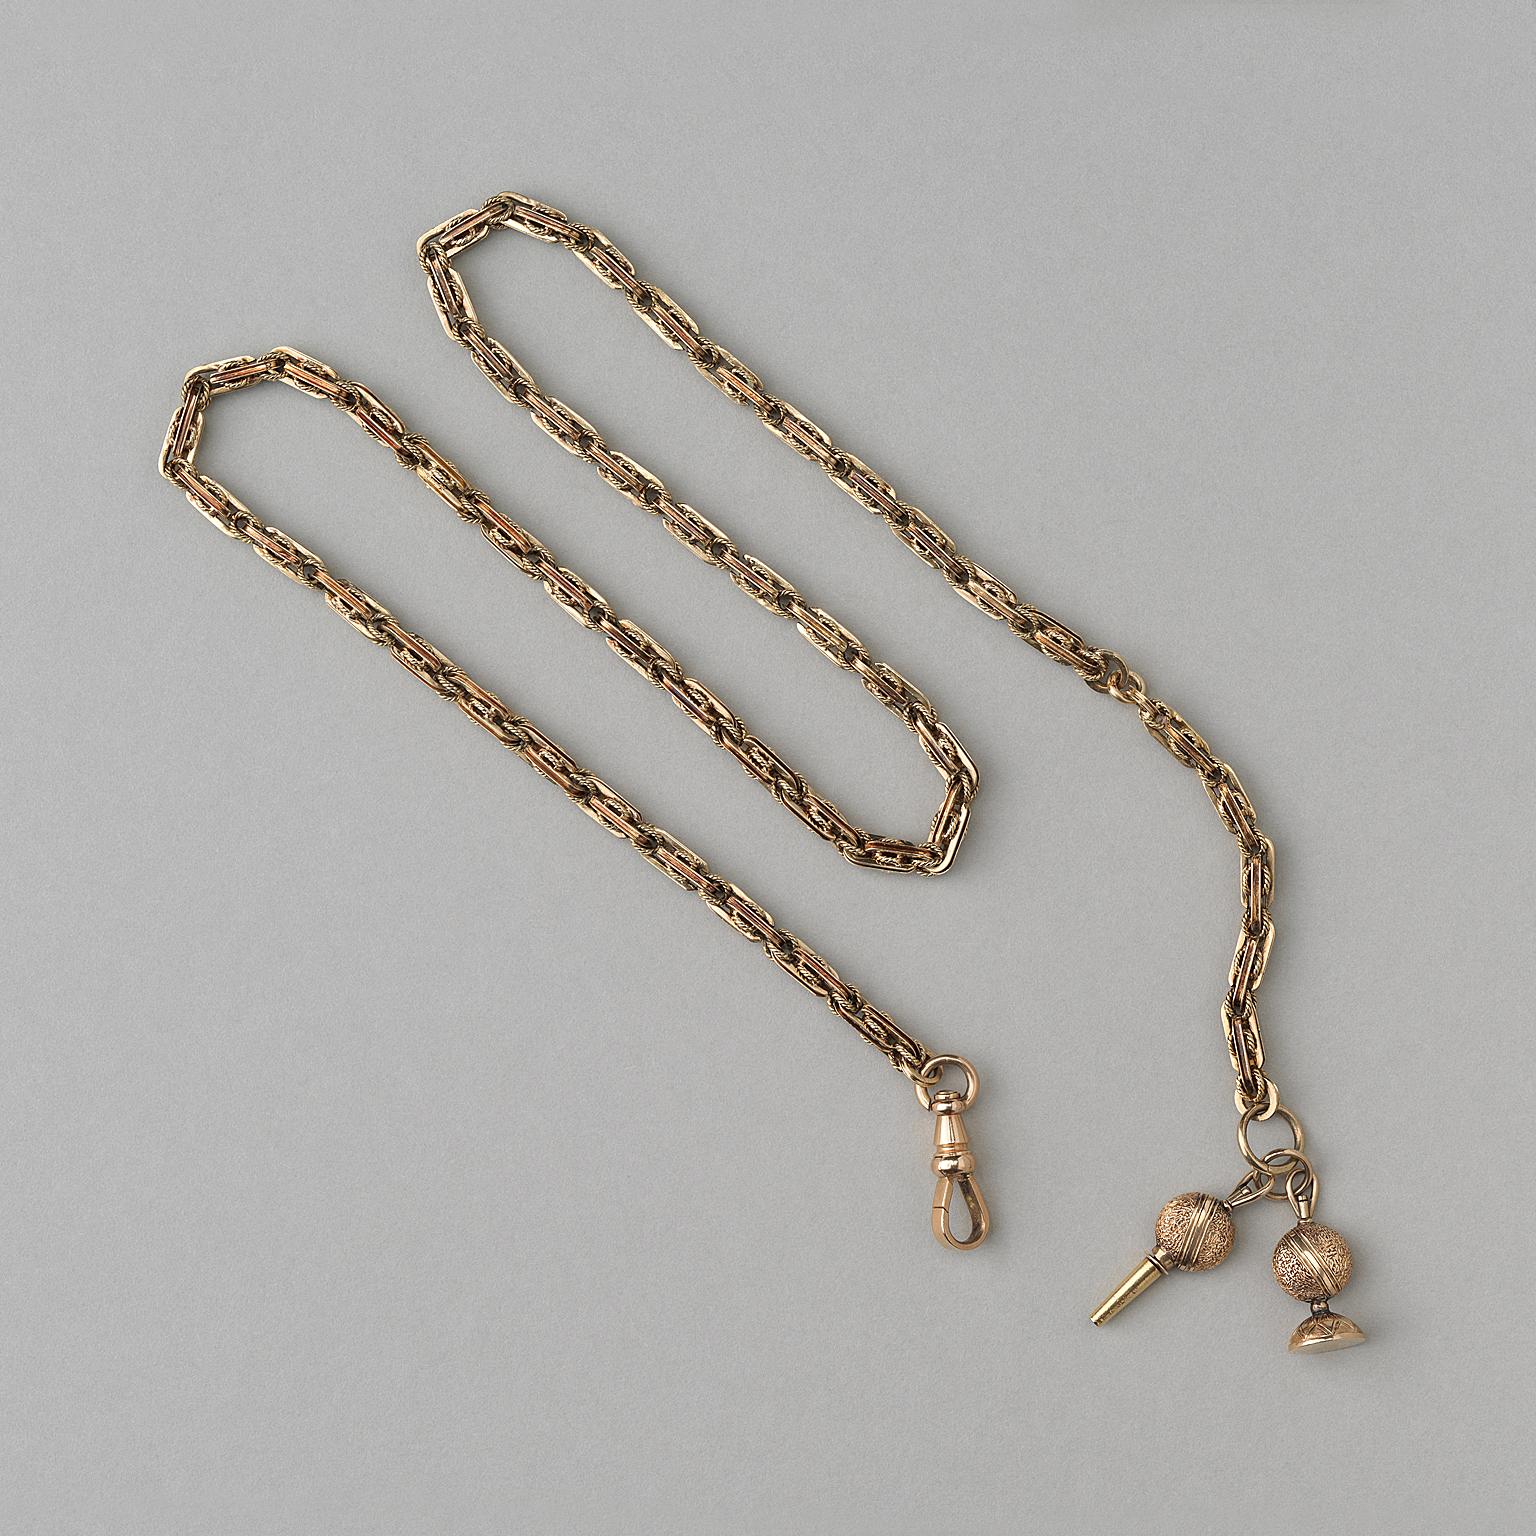 An antique 14 carat chain with a nautical oval long links alternated with links of twisted gold wire with a dog clip and a key and a fob, 19th century.

weight: 38.51 grams
length: 57 cm